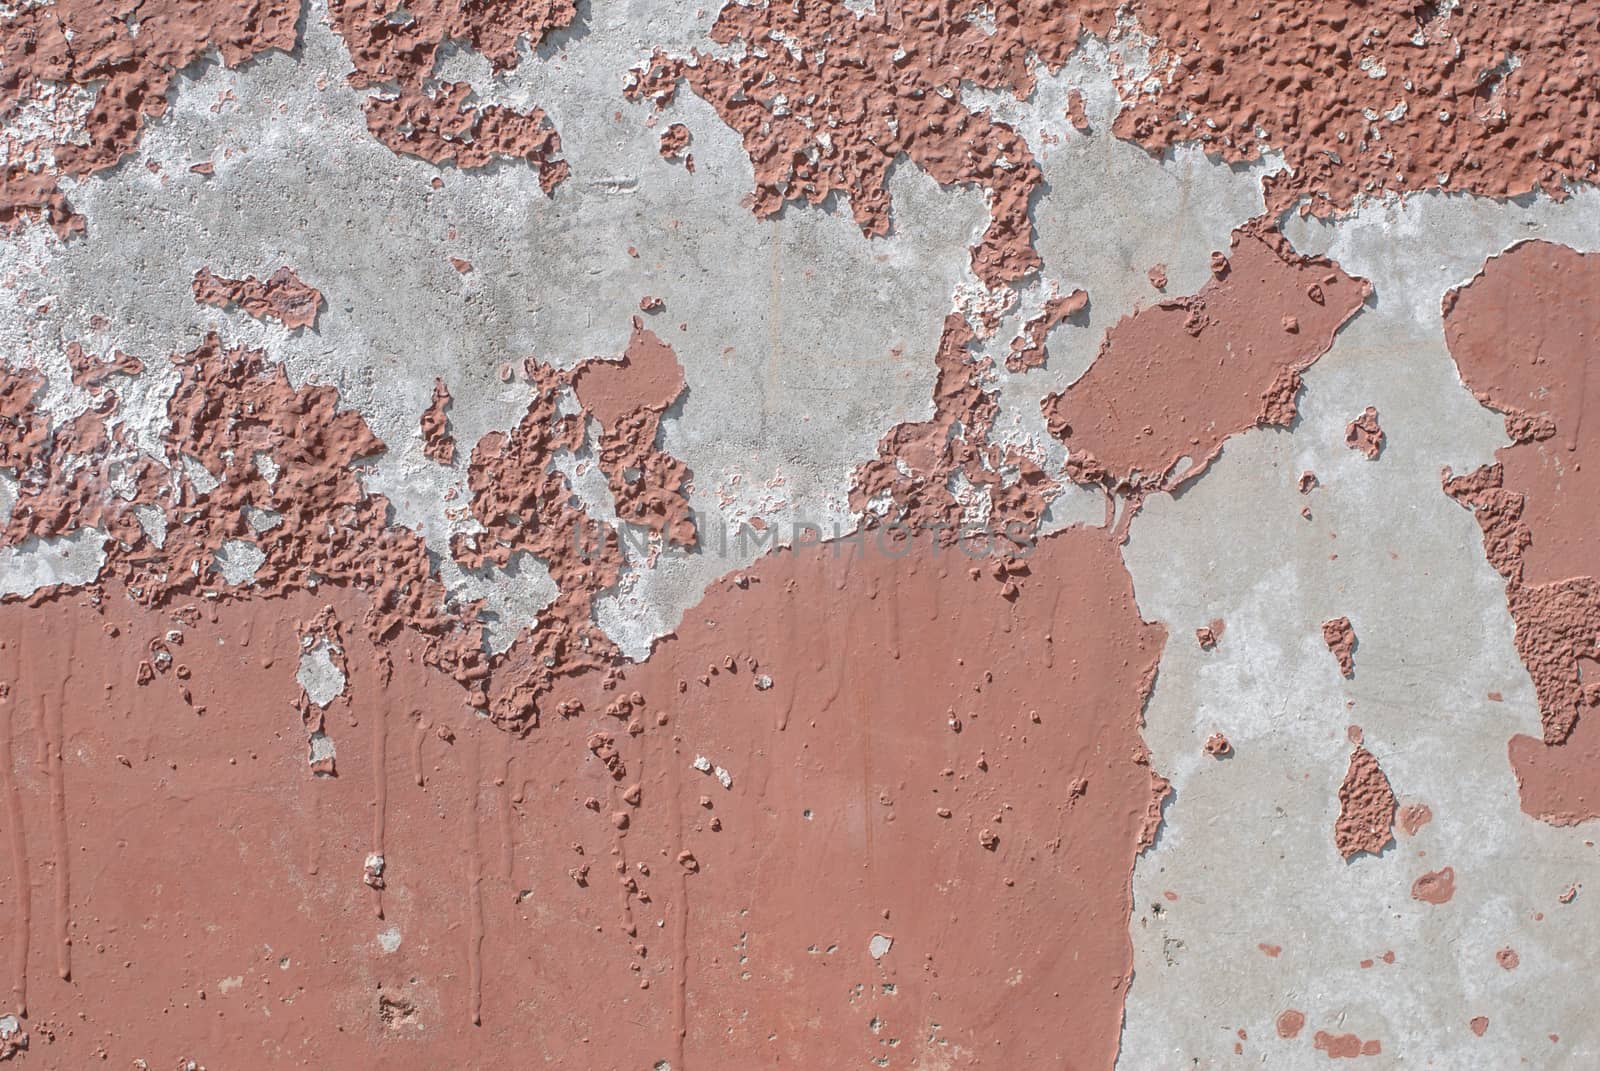 chipped paint on old concrete wall, landscape style, grunge concrete surface, great background or texture by uvisni